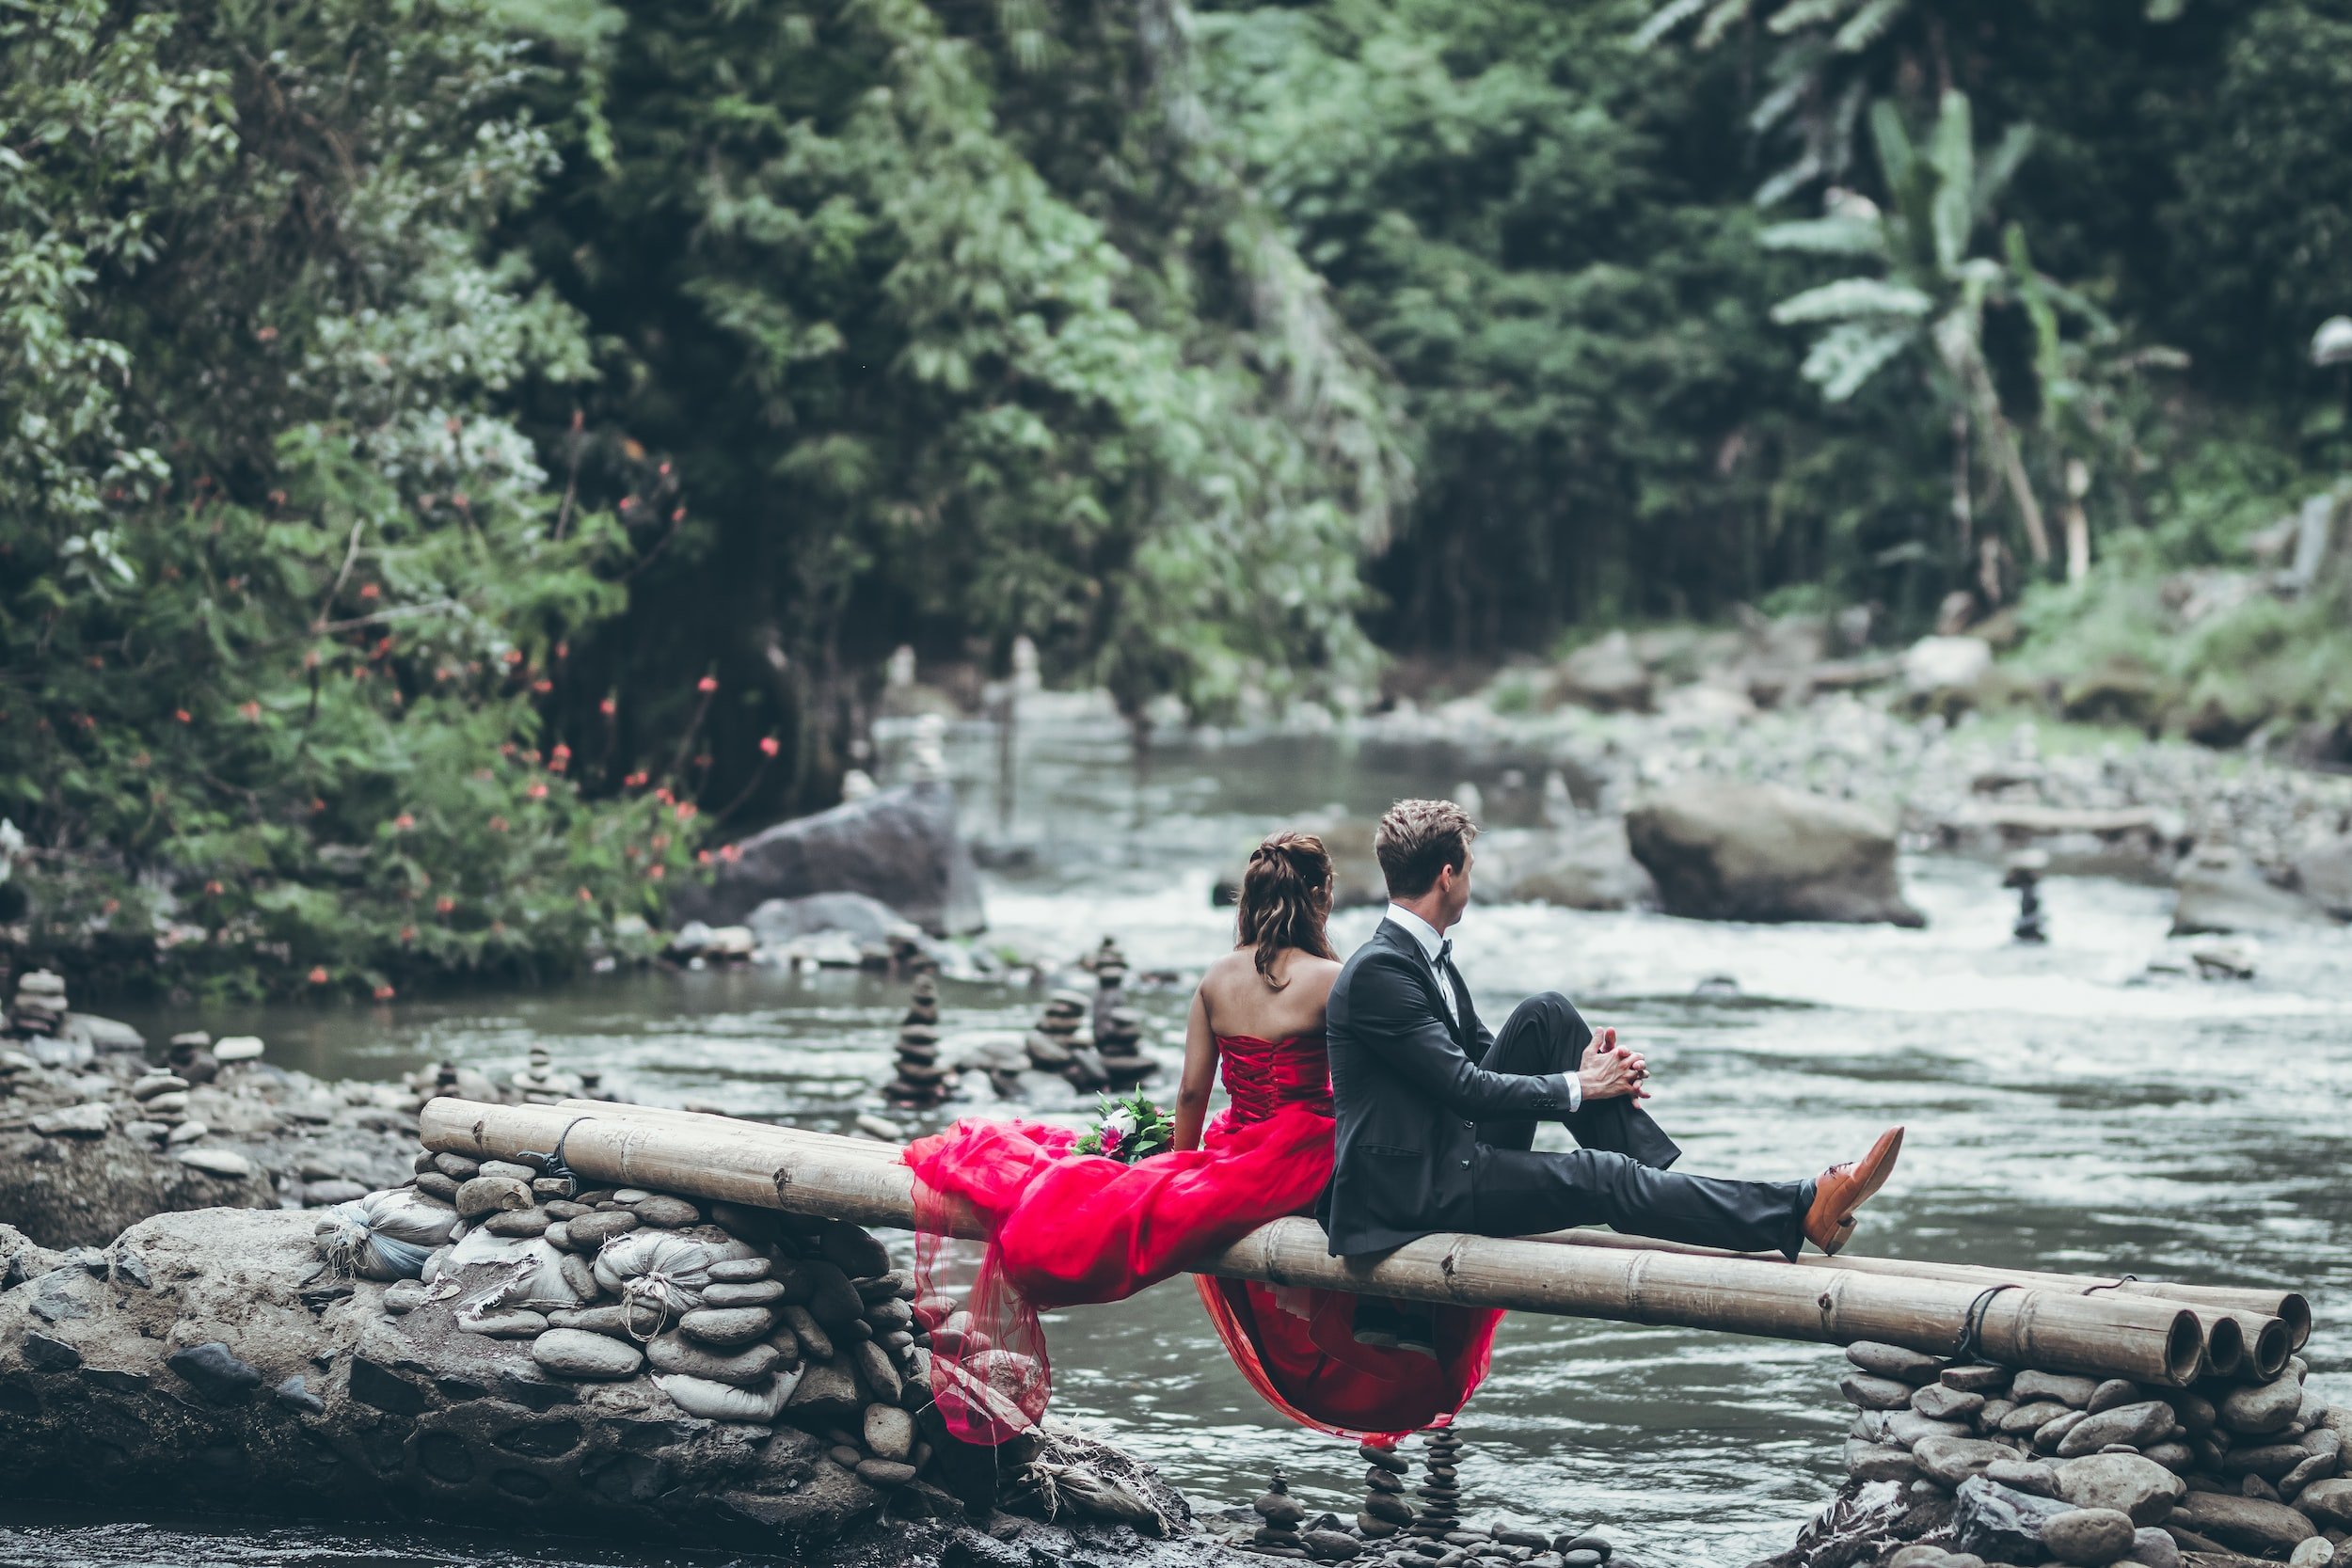 What is the best month to visit Bali for a honeymoon?